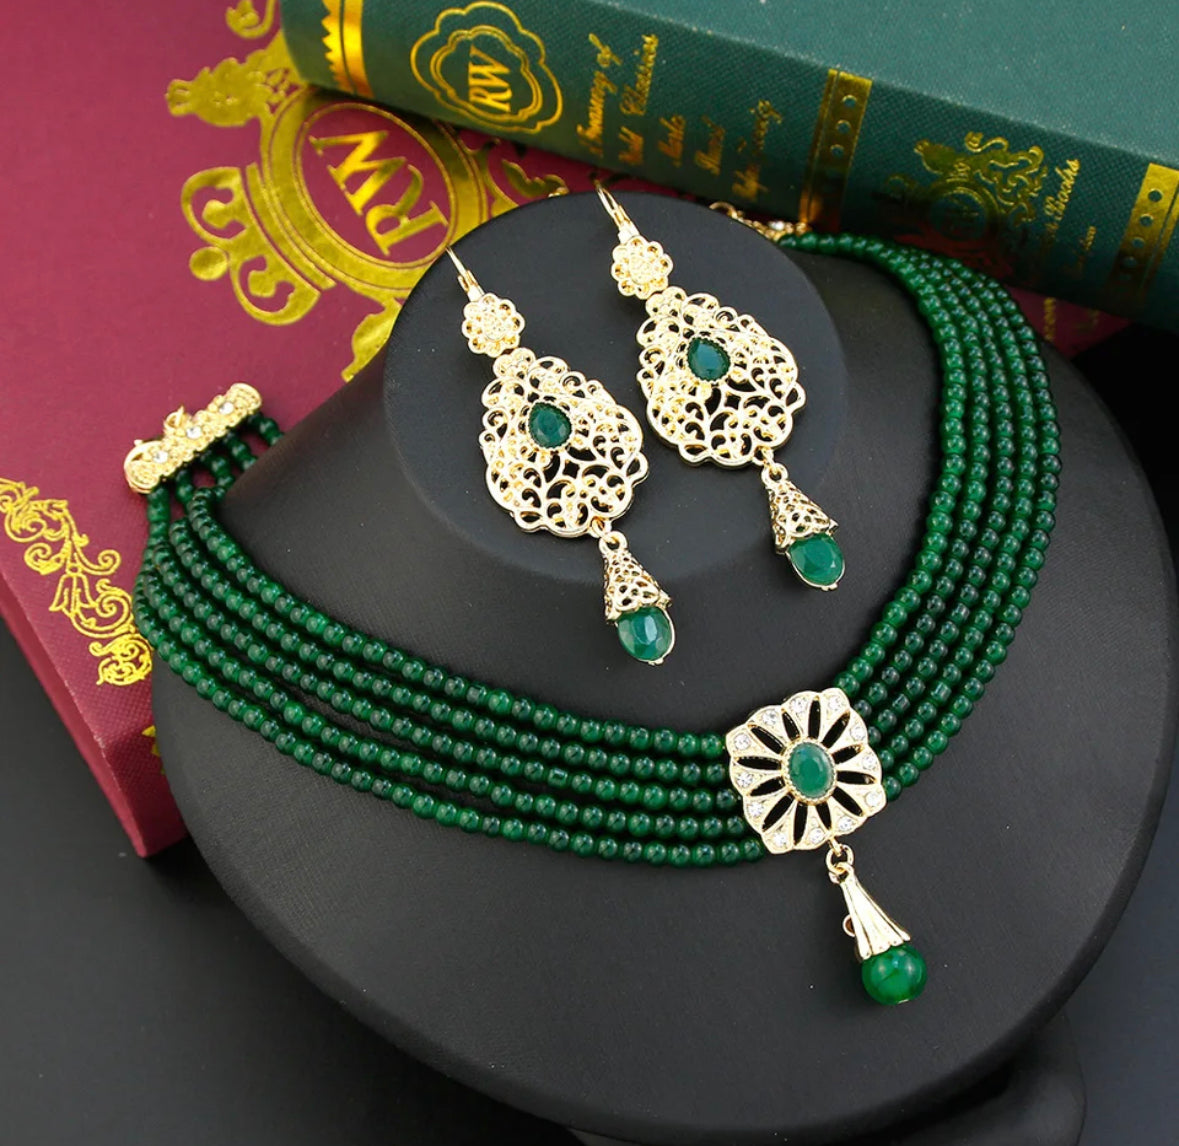 Morocco stunning bridal set of choker necklace and earrings set